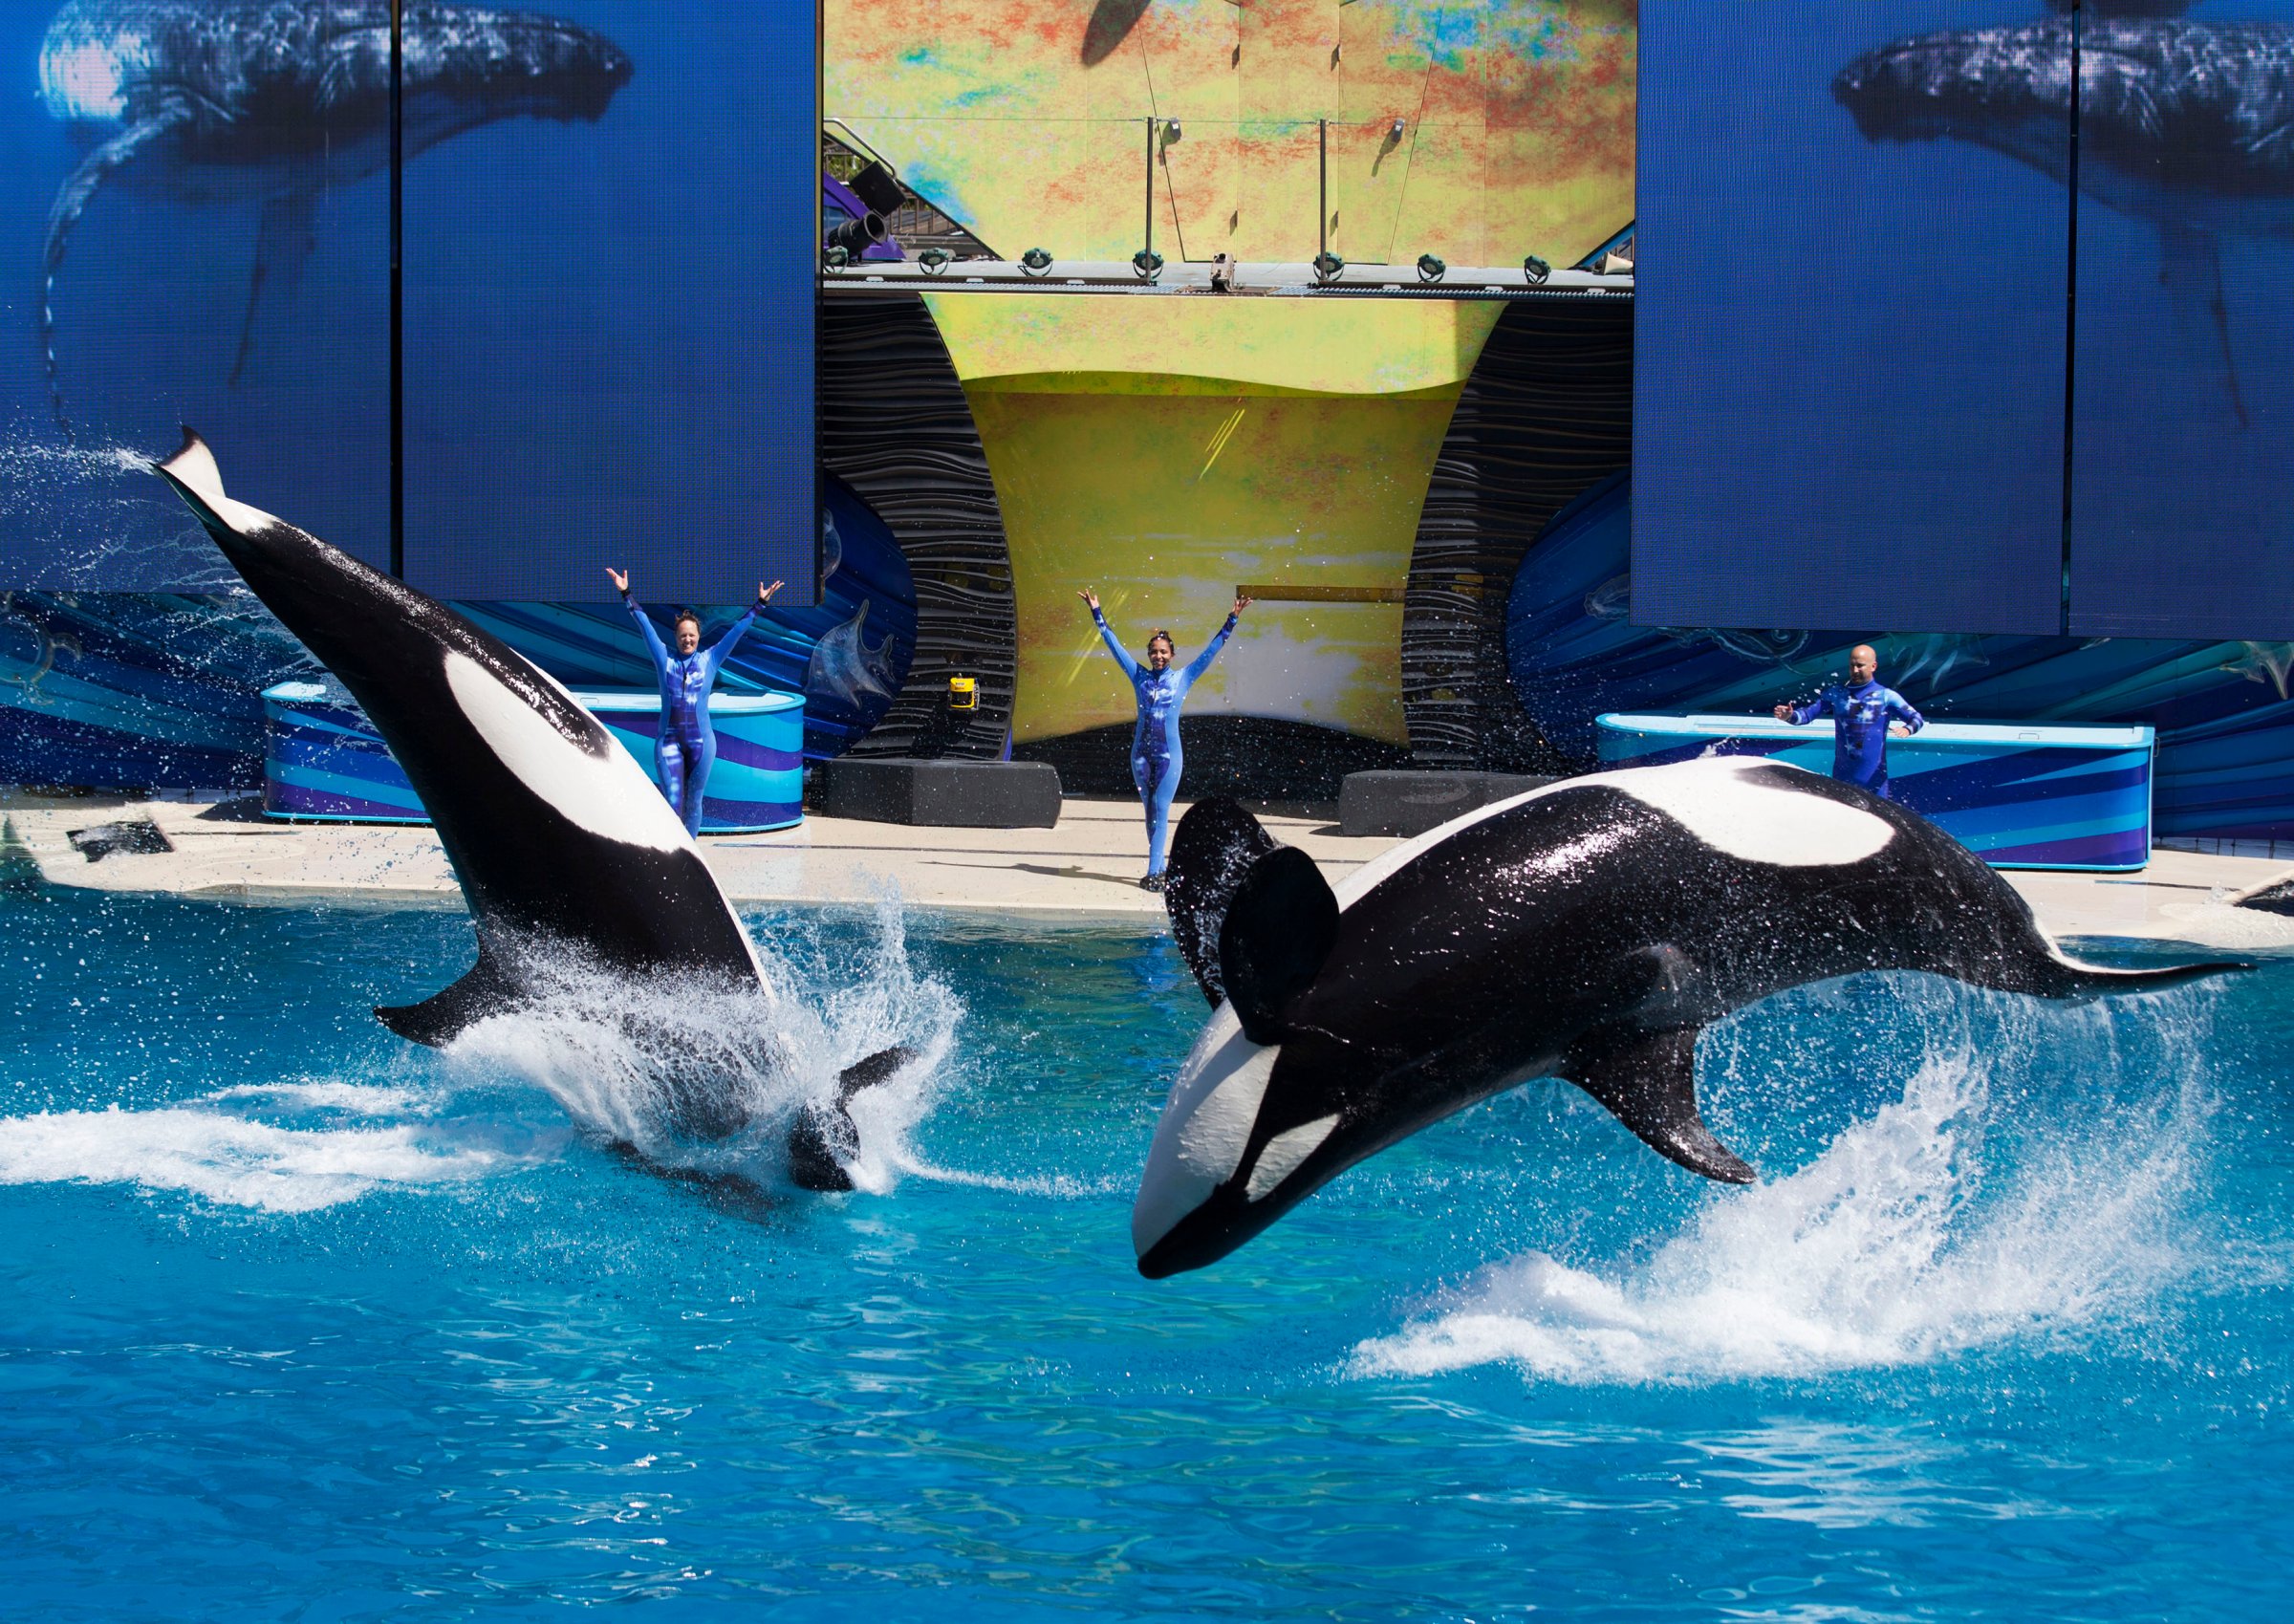 Trainers have Orca killer whales perform for the crowd  during a show at the animal theme park SeaWorld in San Diego, California